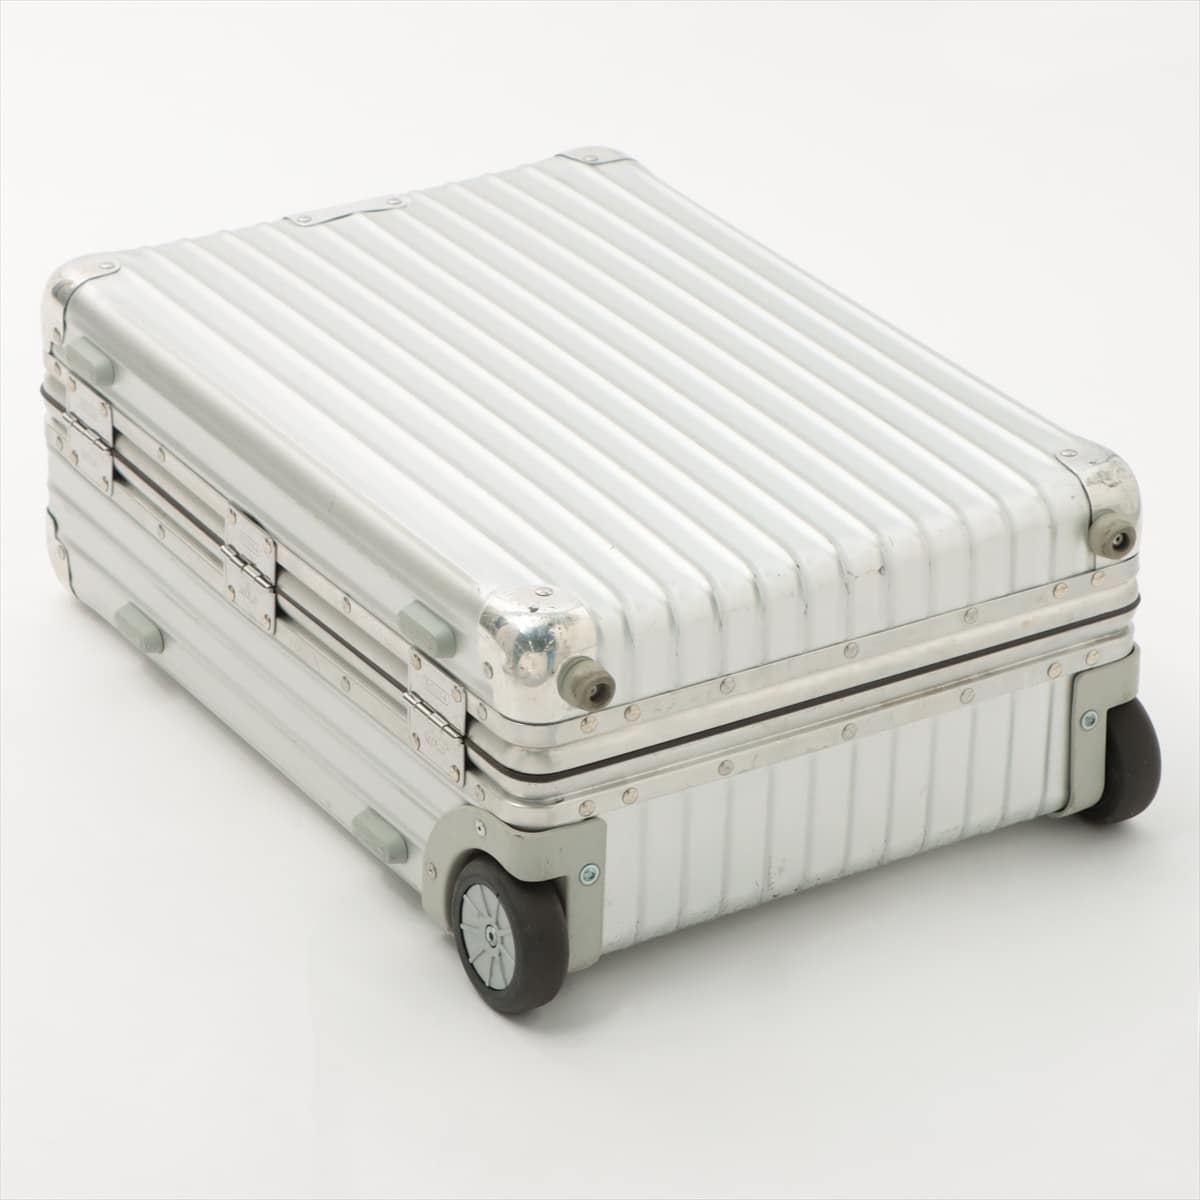 Rimowa Classic Flight Carry case Silver Setting number left and right: 121